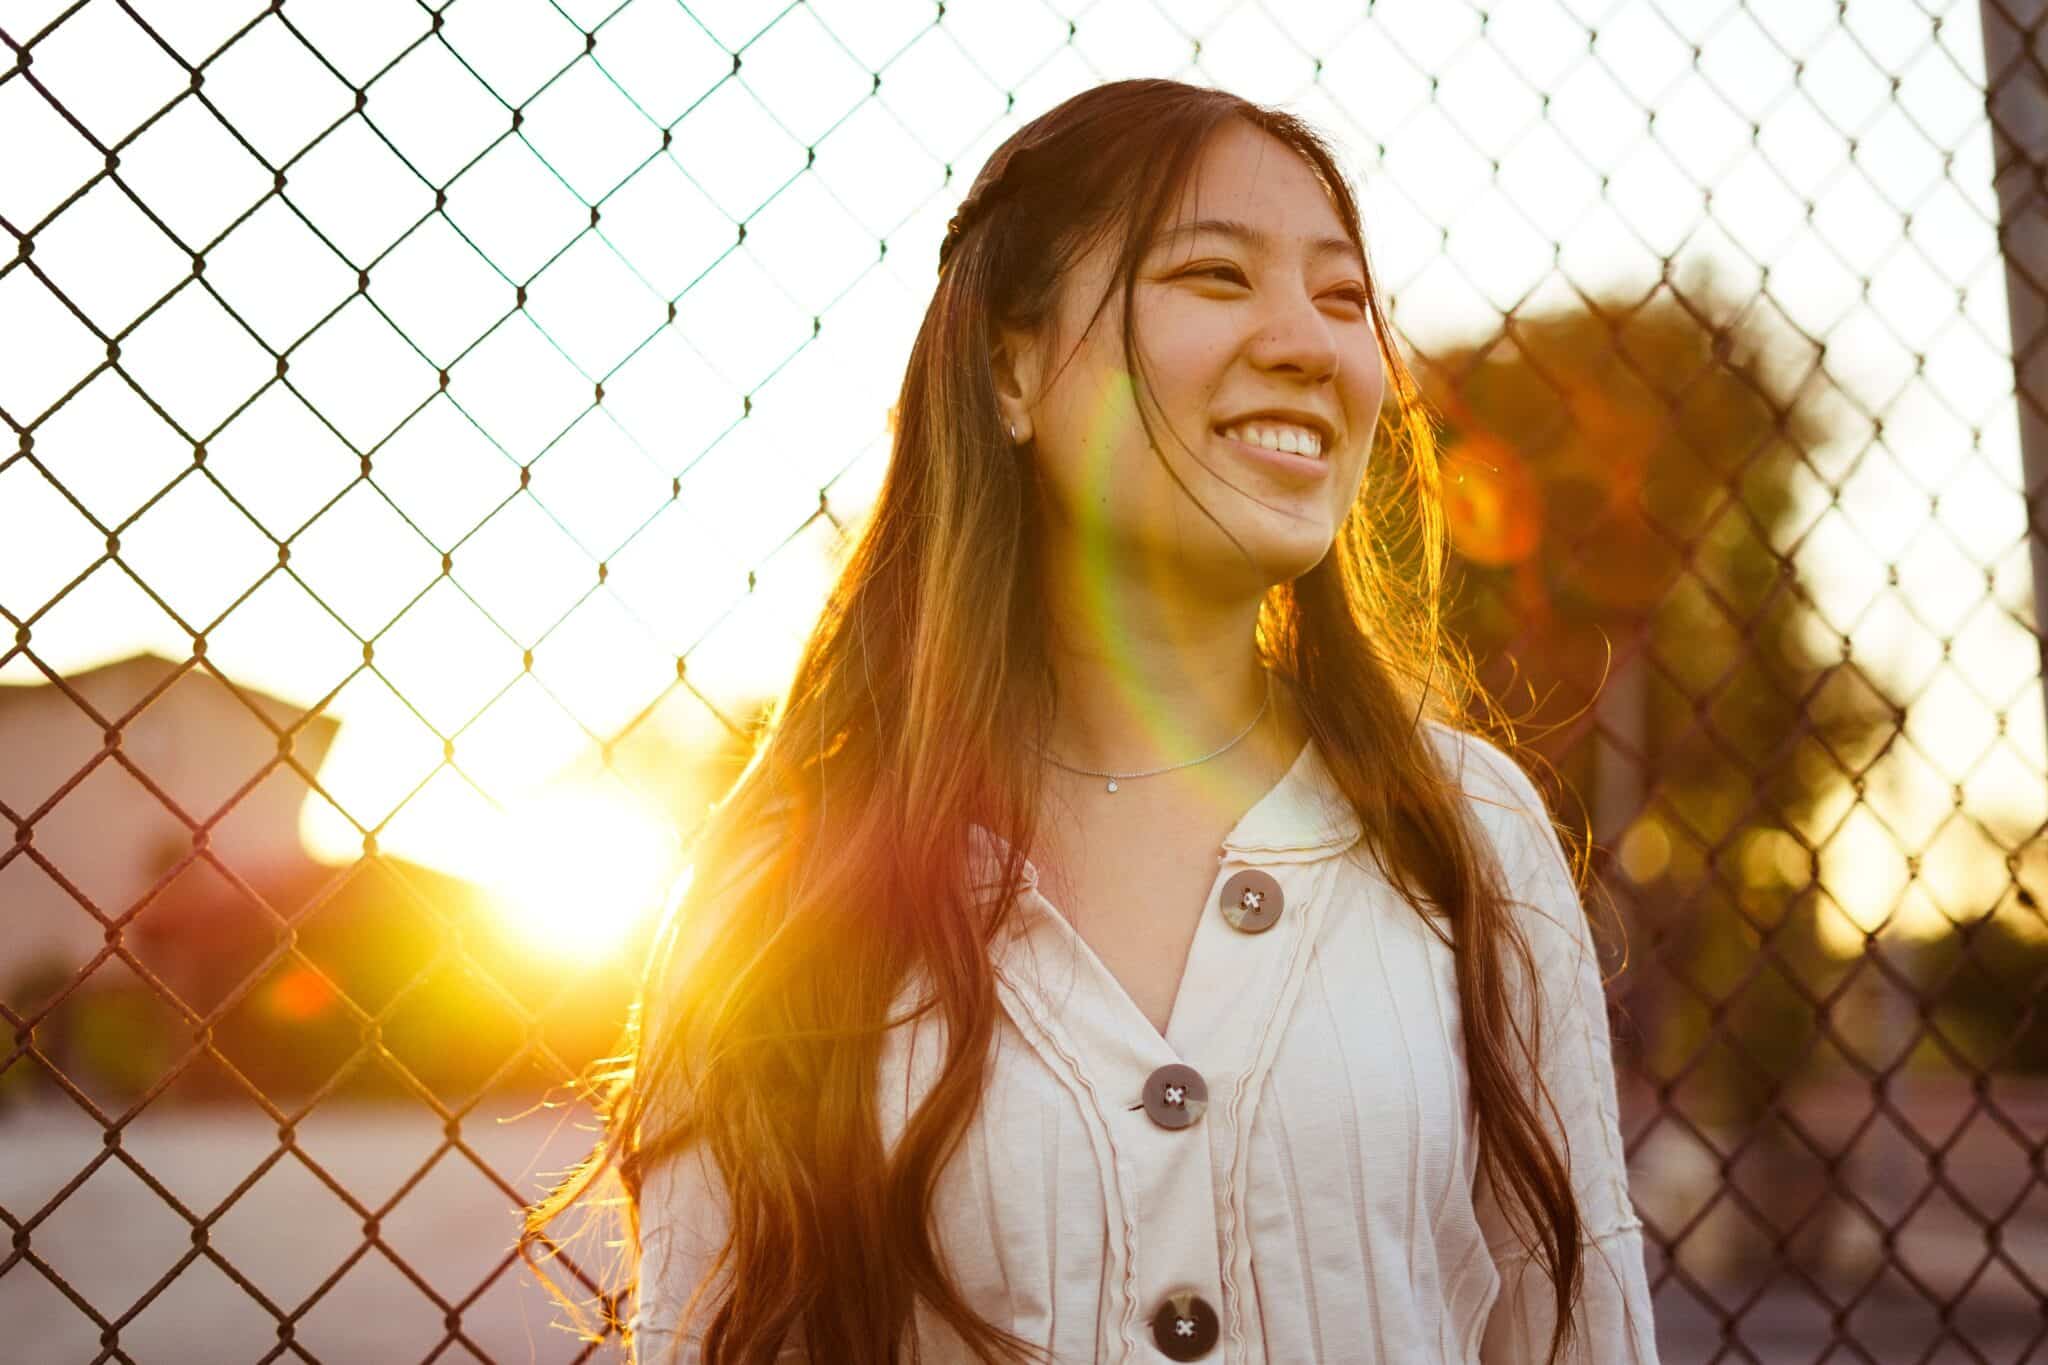 woman smiling | Photo by Conner Ching on Unsplash